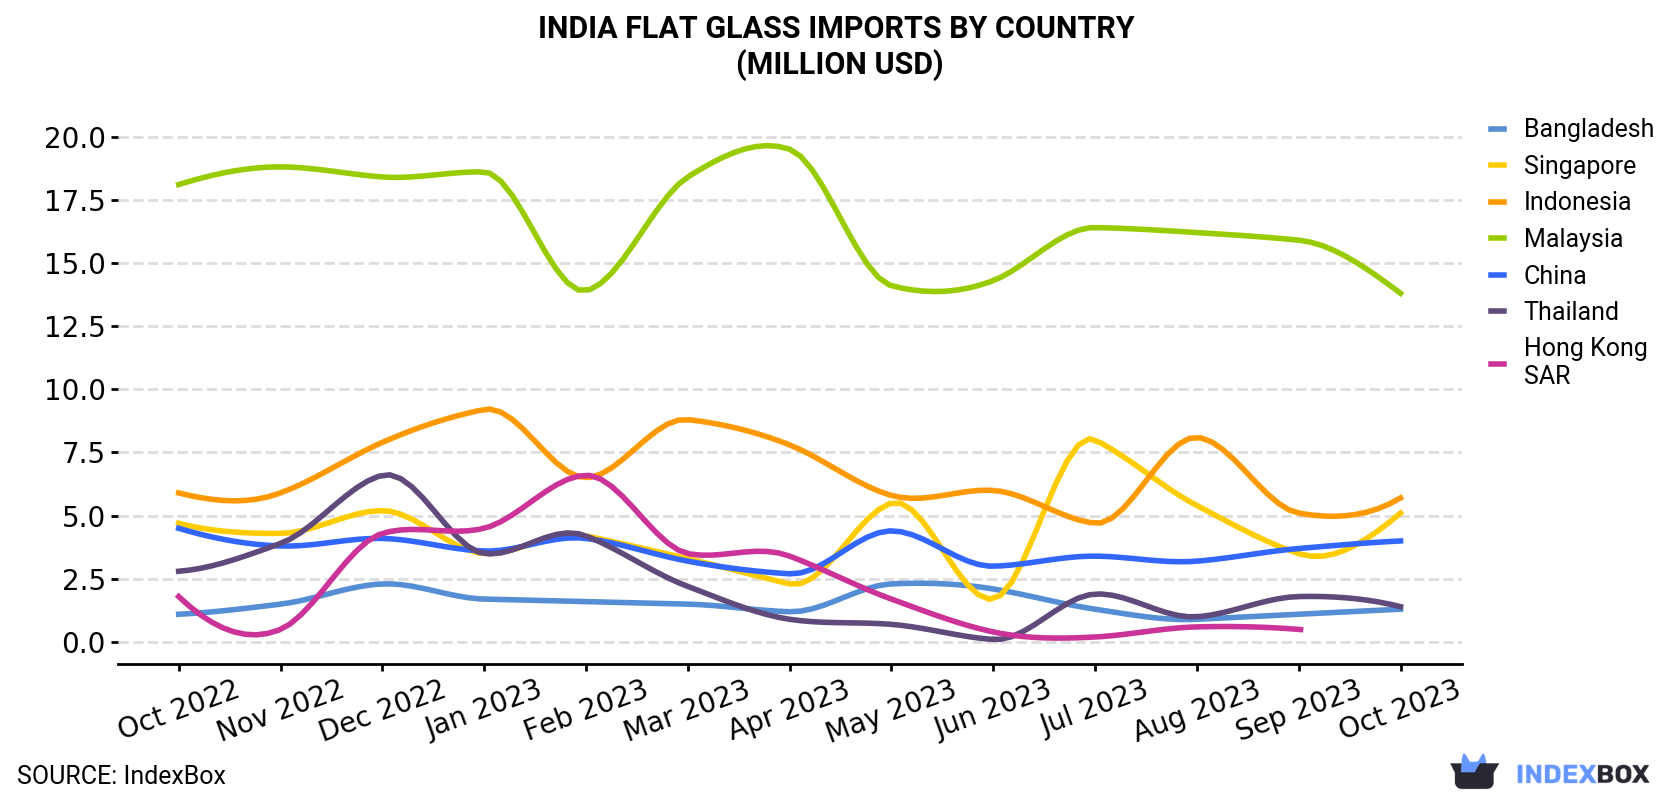 India Flat Glass Imports By Country (Million USD)